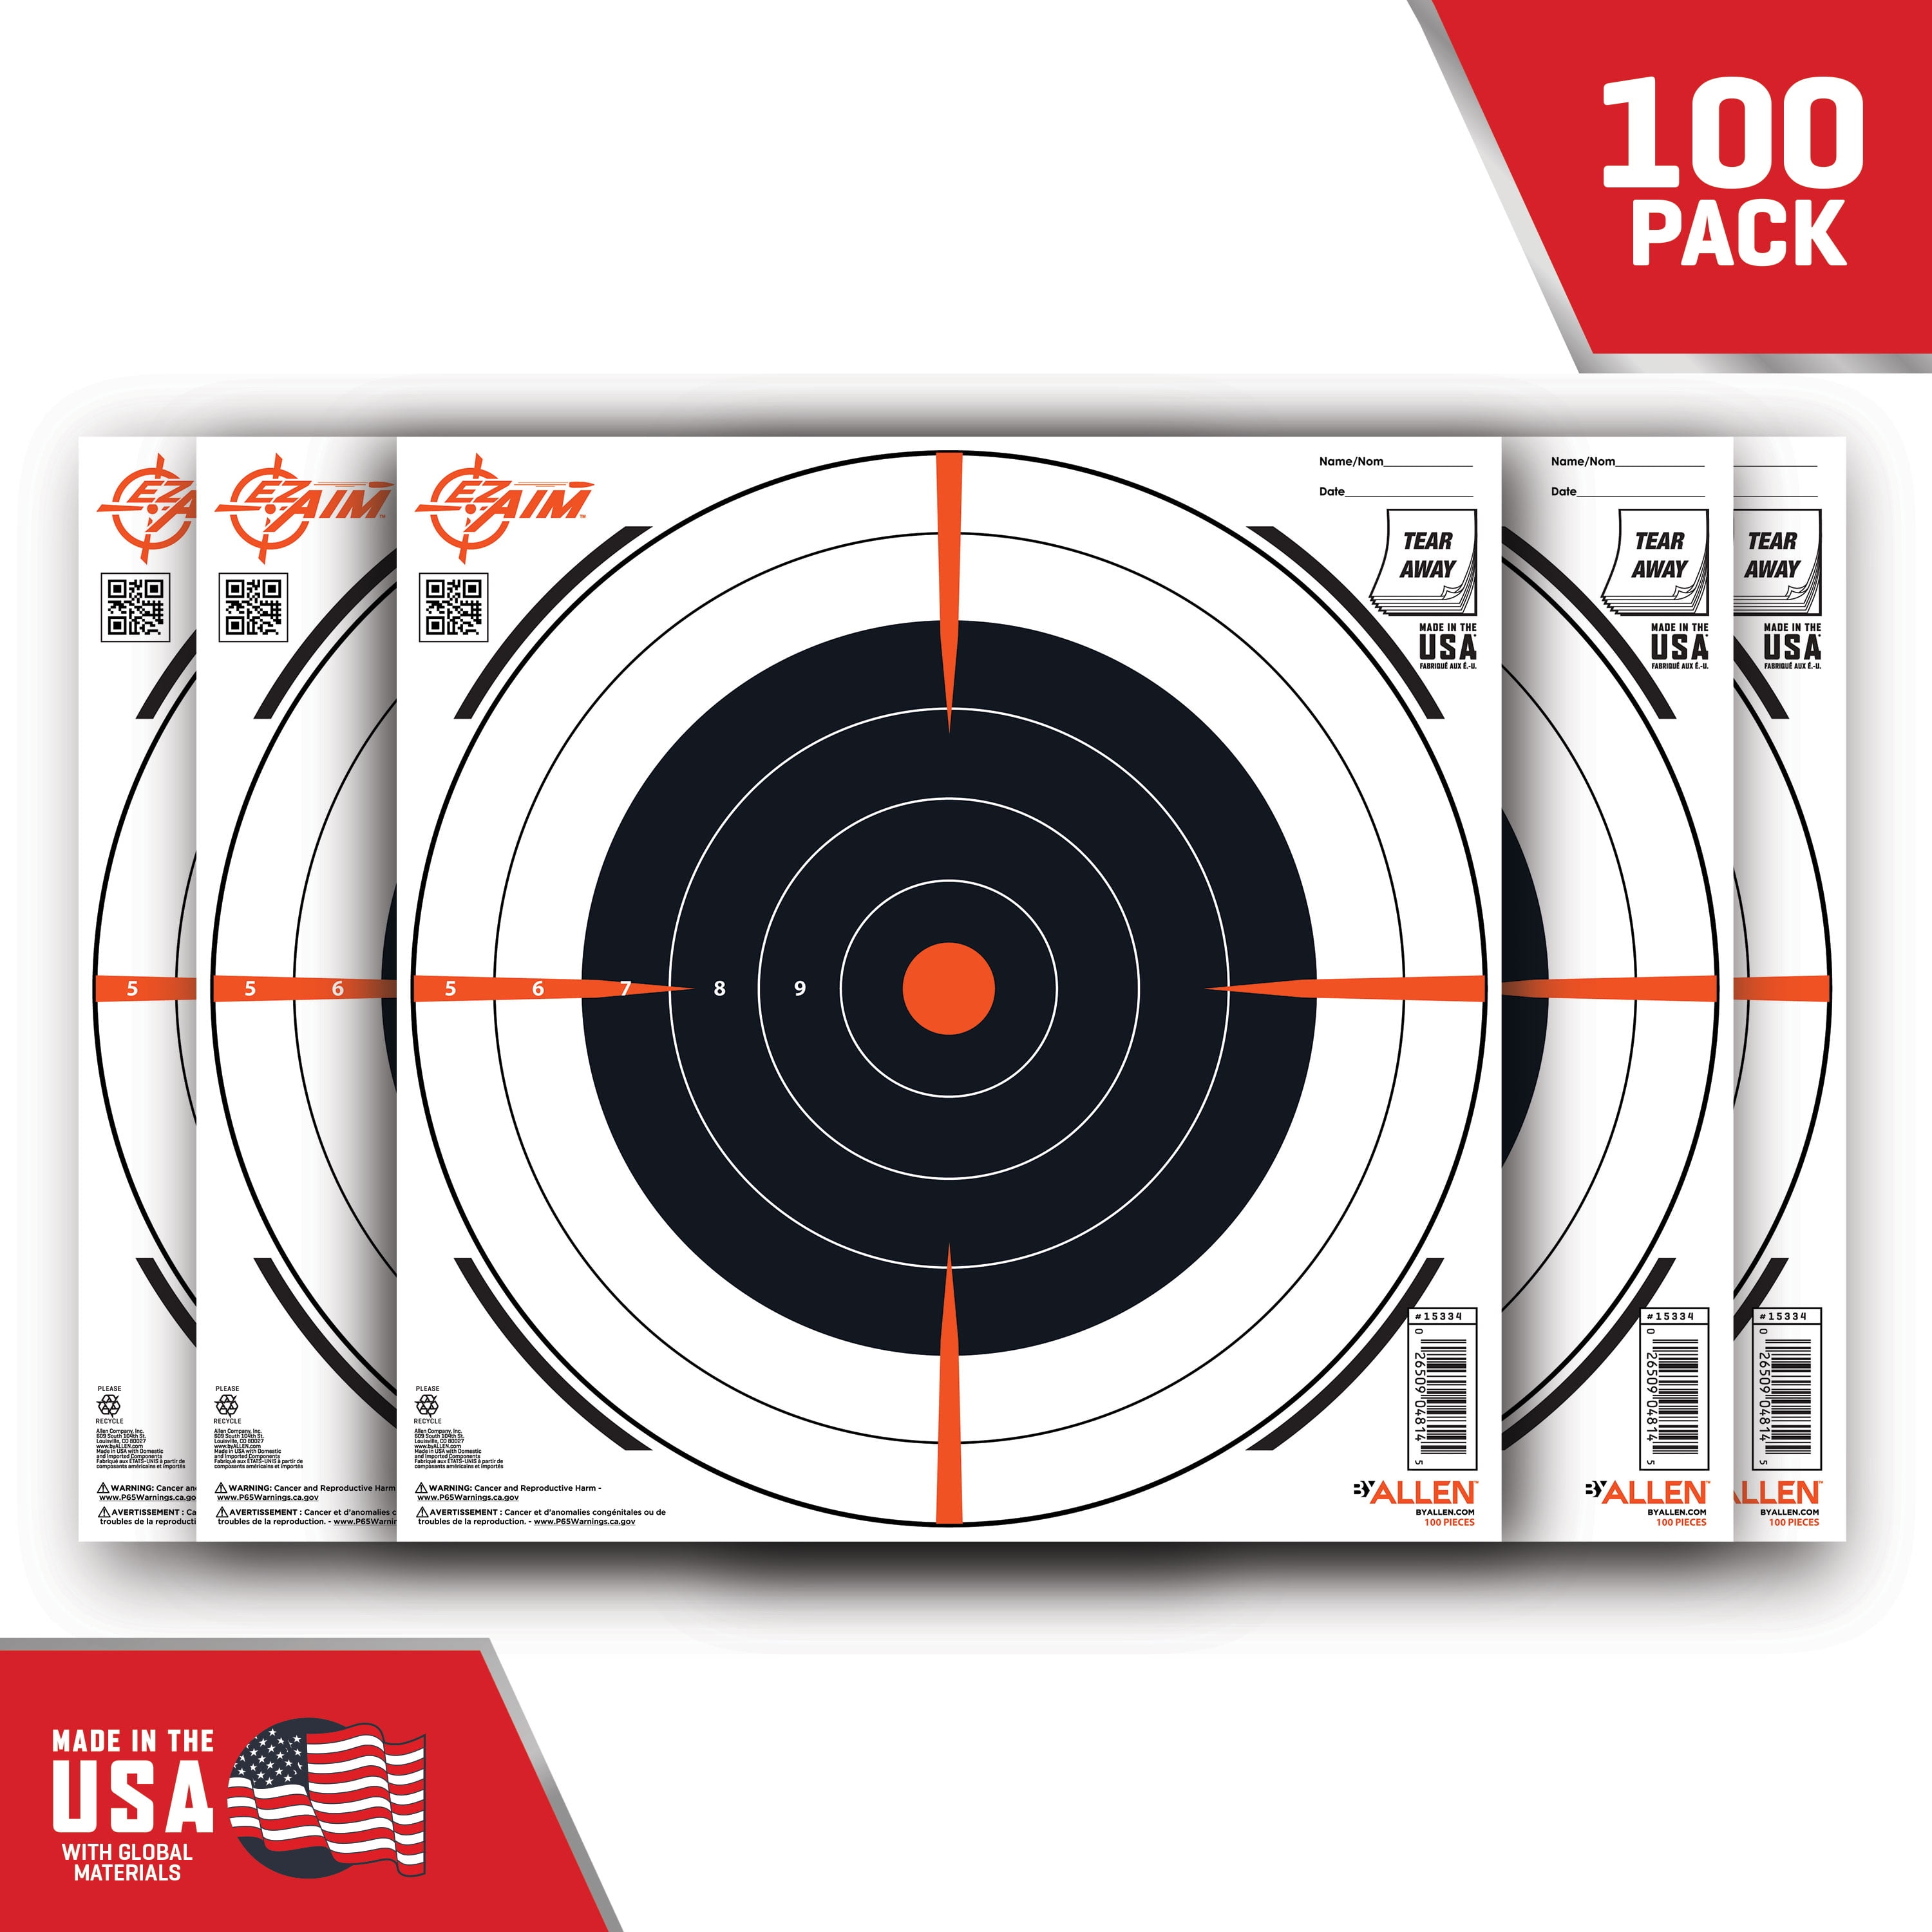 HOT "100" HIGH QUALITY SHOOTING TARGETS at WHOLESALE PRICING Very Popular Item 